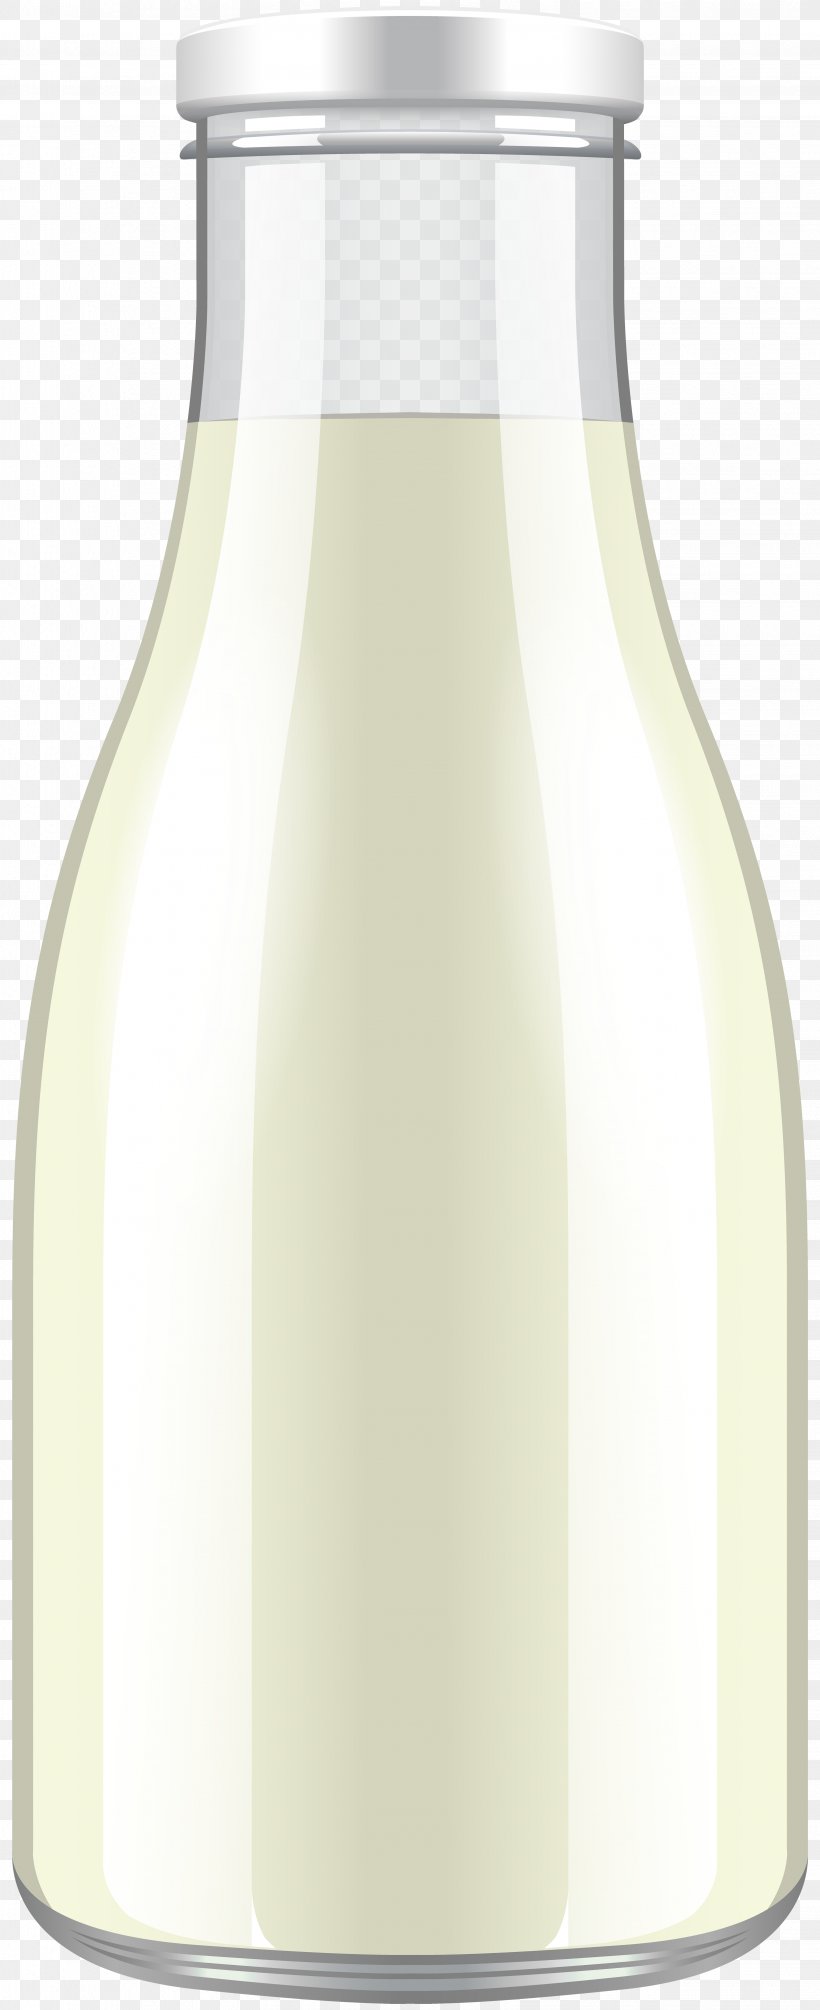 Bottle Glass, PNG, 3263x8000px, Glass, Bottle, Product, Product Design Download Free